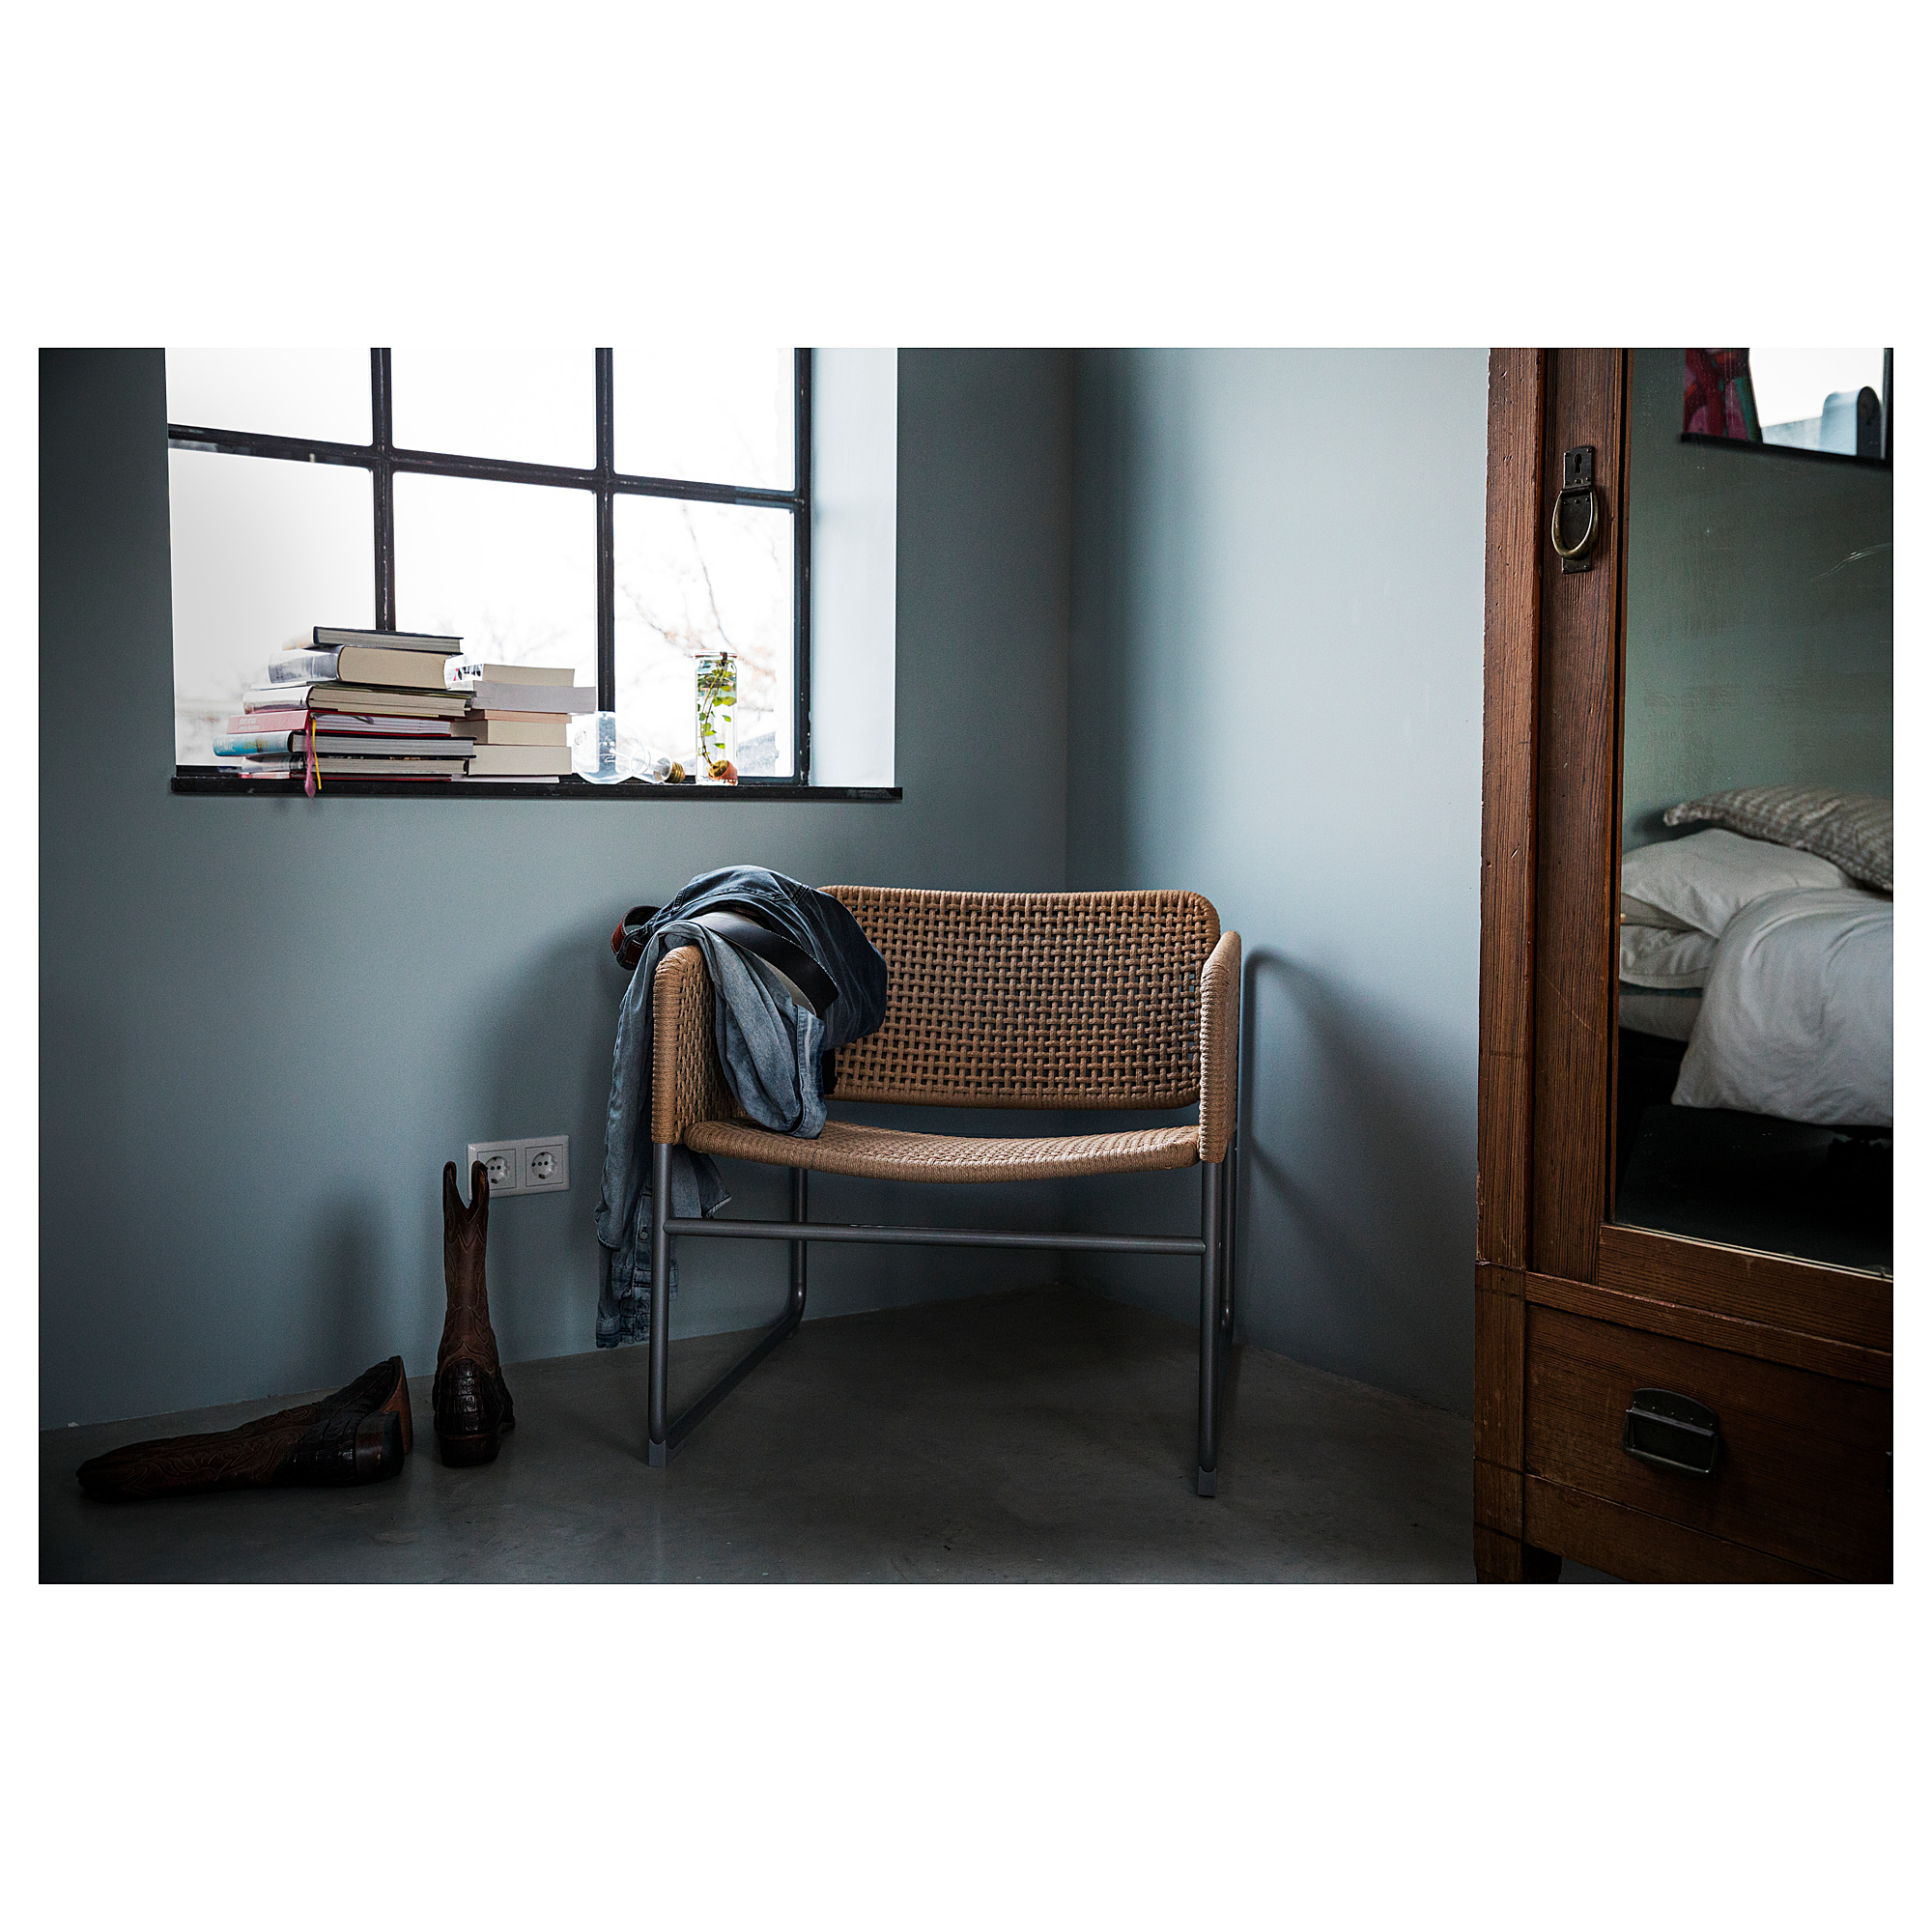 <h2><a href="https://www.ikea.com/ca/fr/catalog/products/00392649/" target="_blank" rel="noopener">Fauteuil</a></h2>
<p>INDUSTRIELL</p>
<p>129 $</p>
